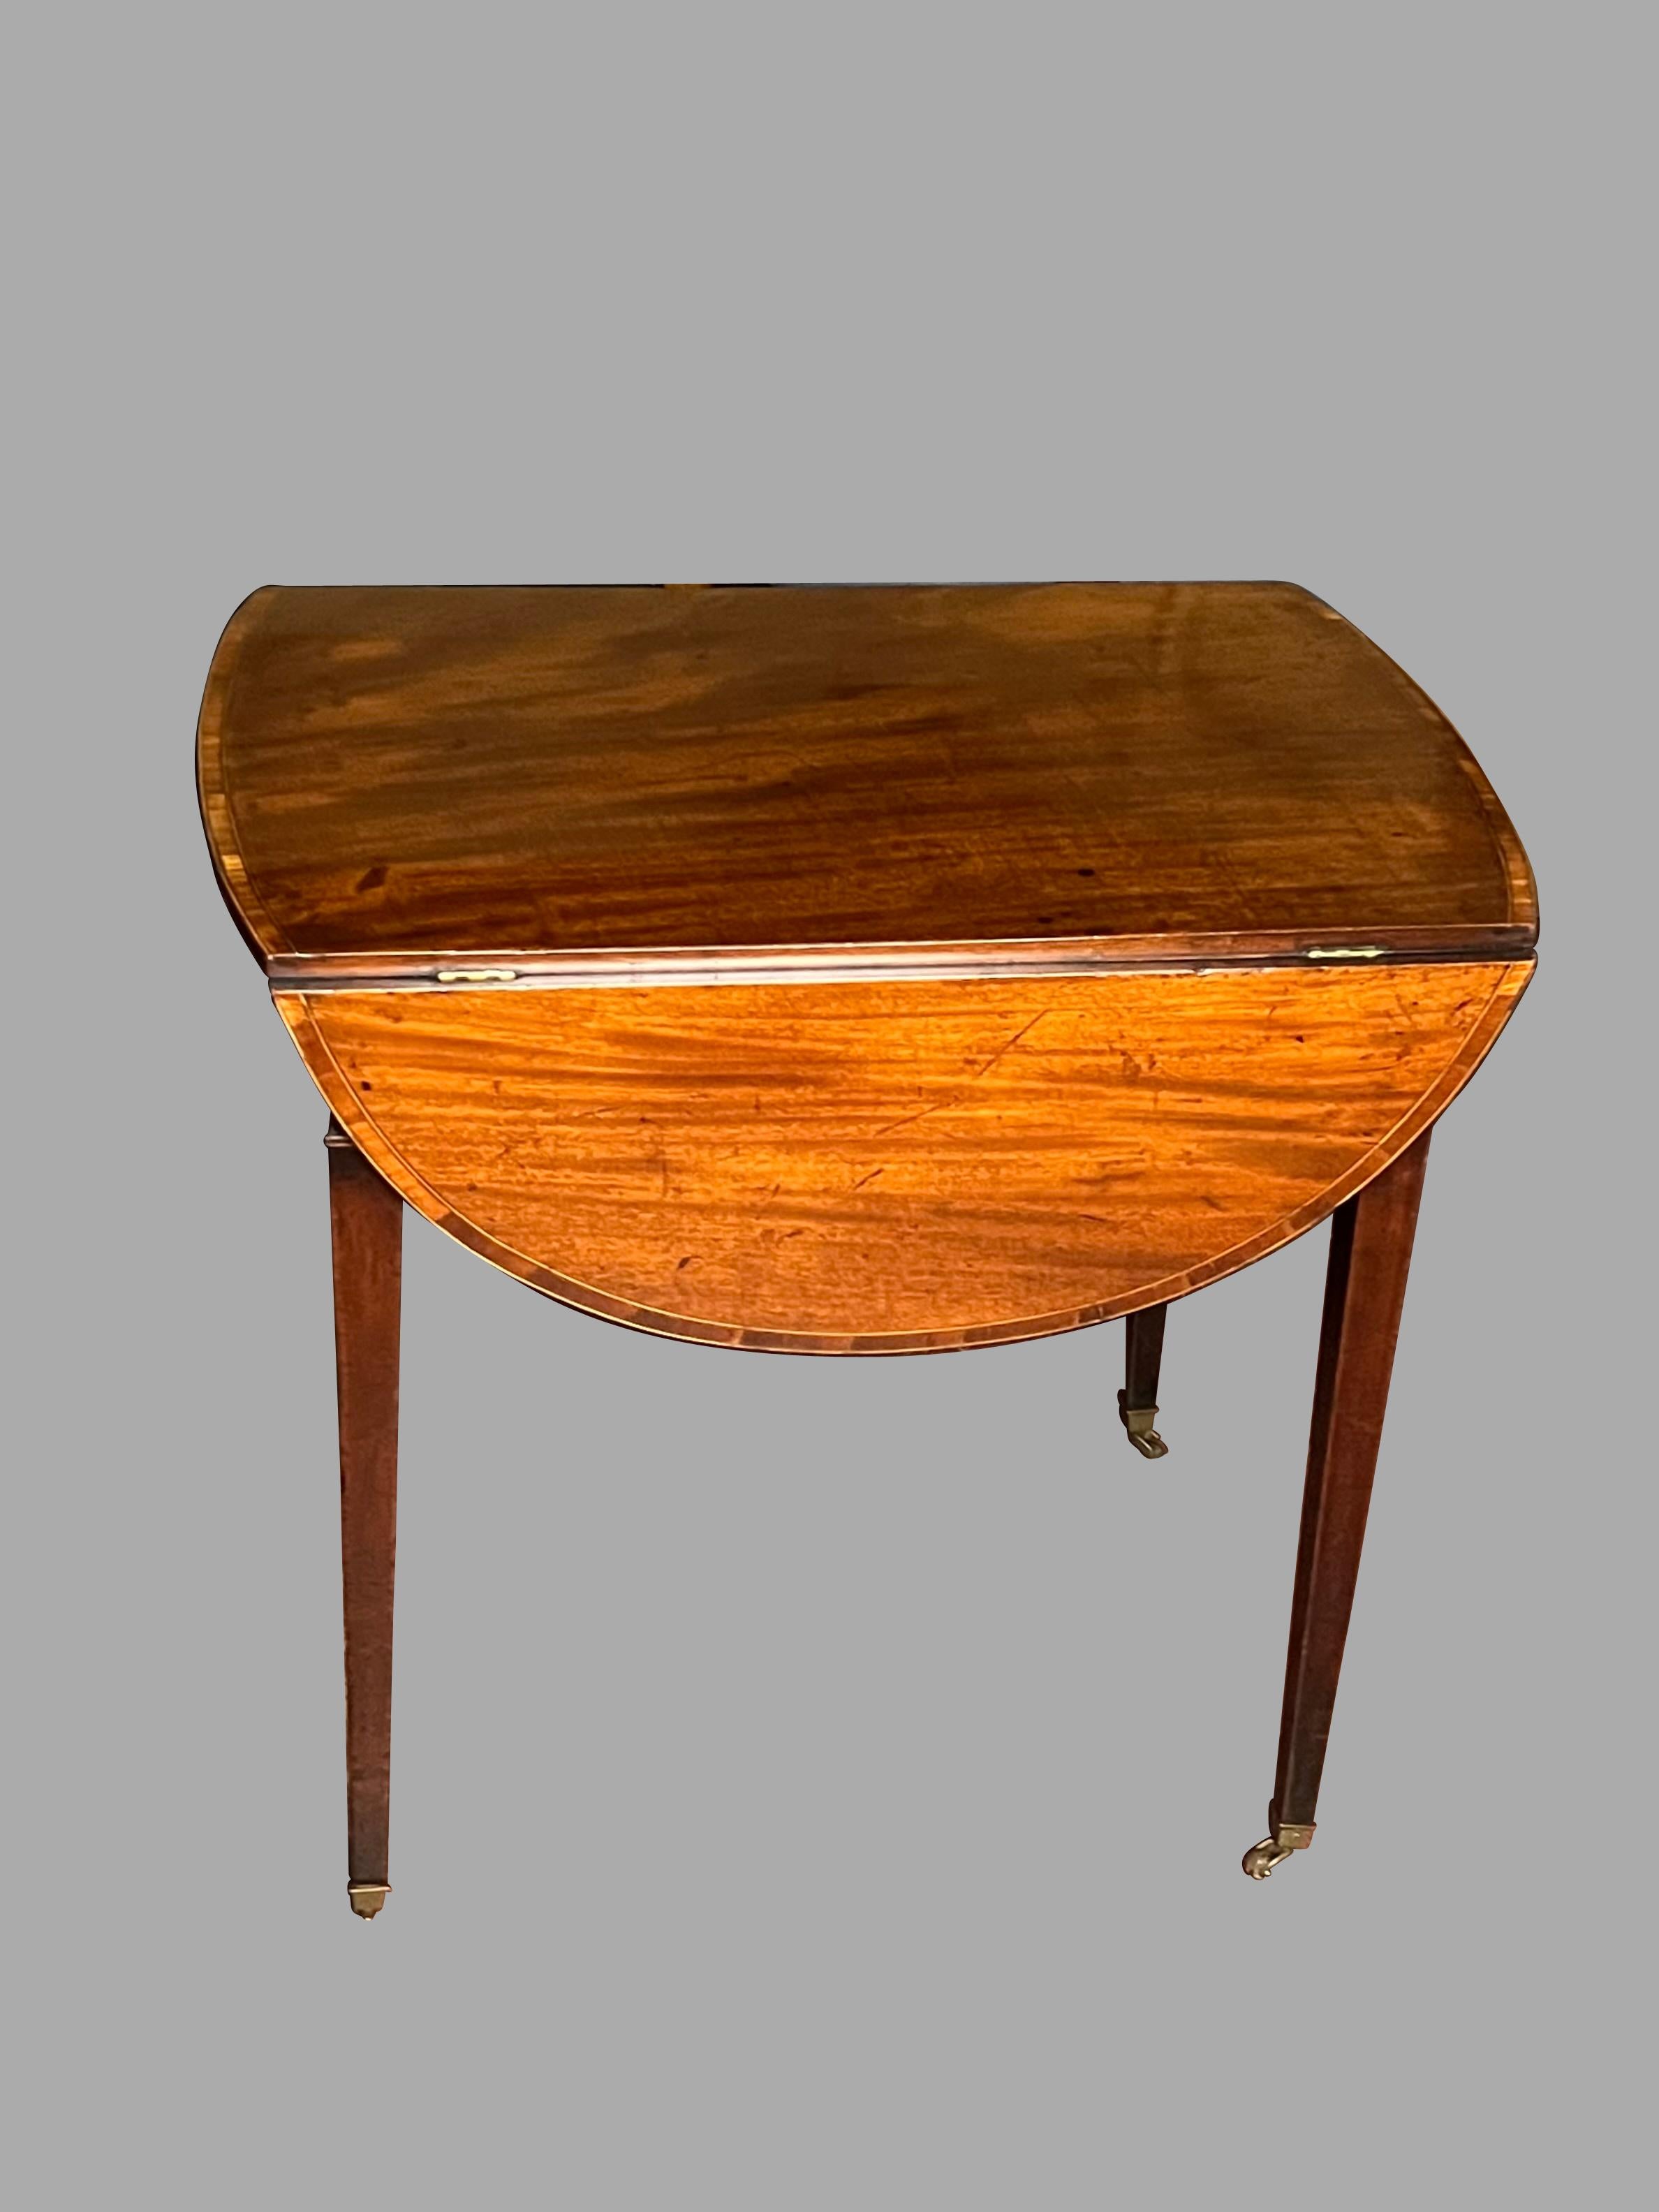 Fine English Inlaid Mahogany Hepplewhite Period Pembroke Table with Drawer For Sale 7